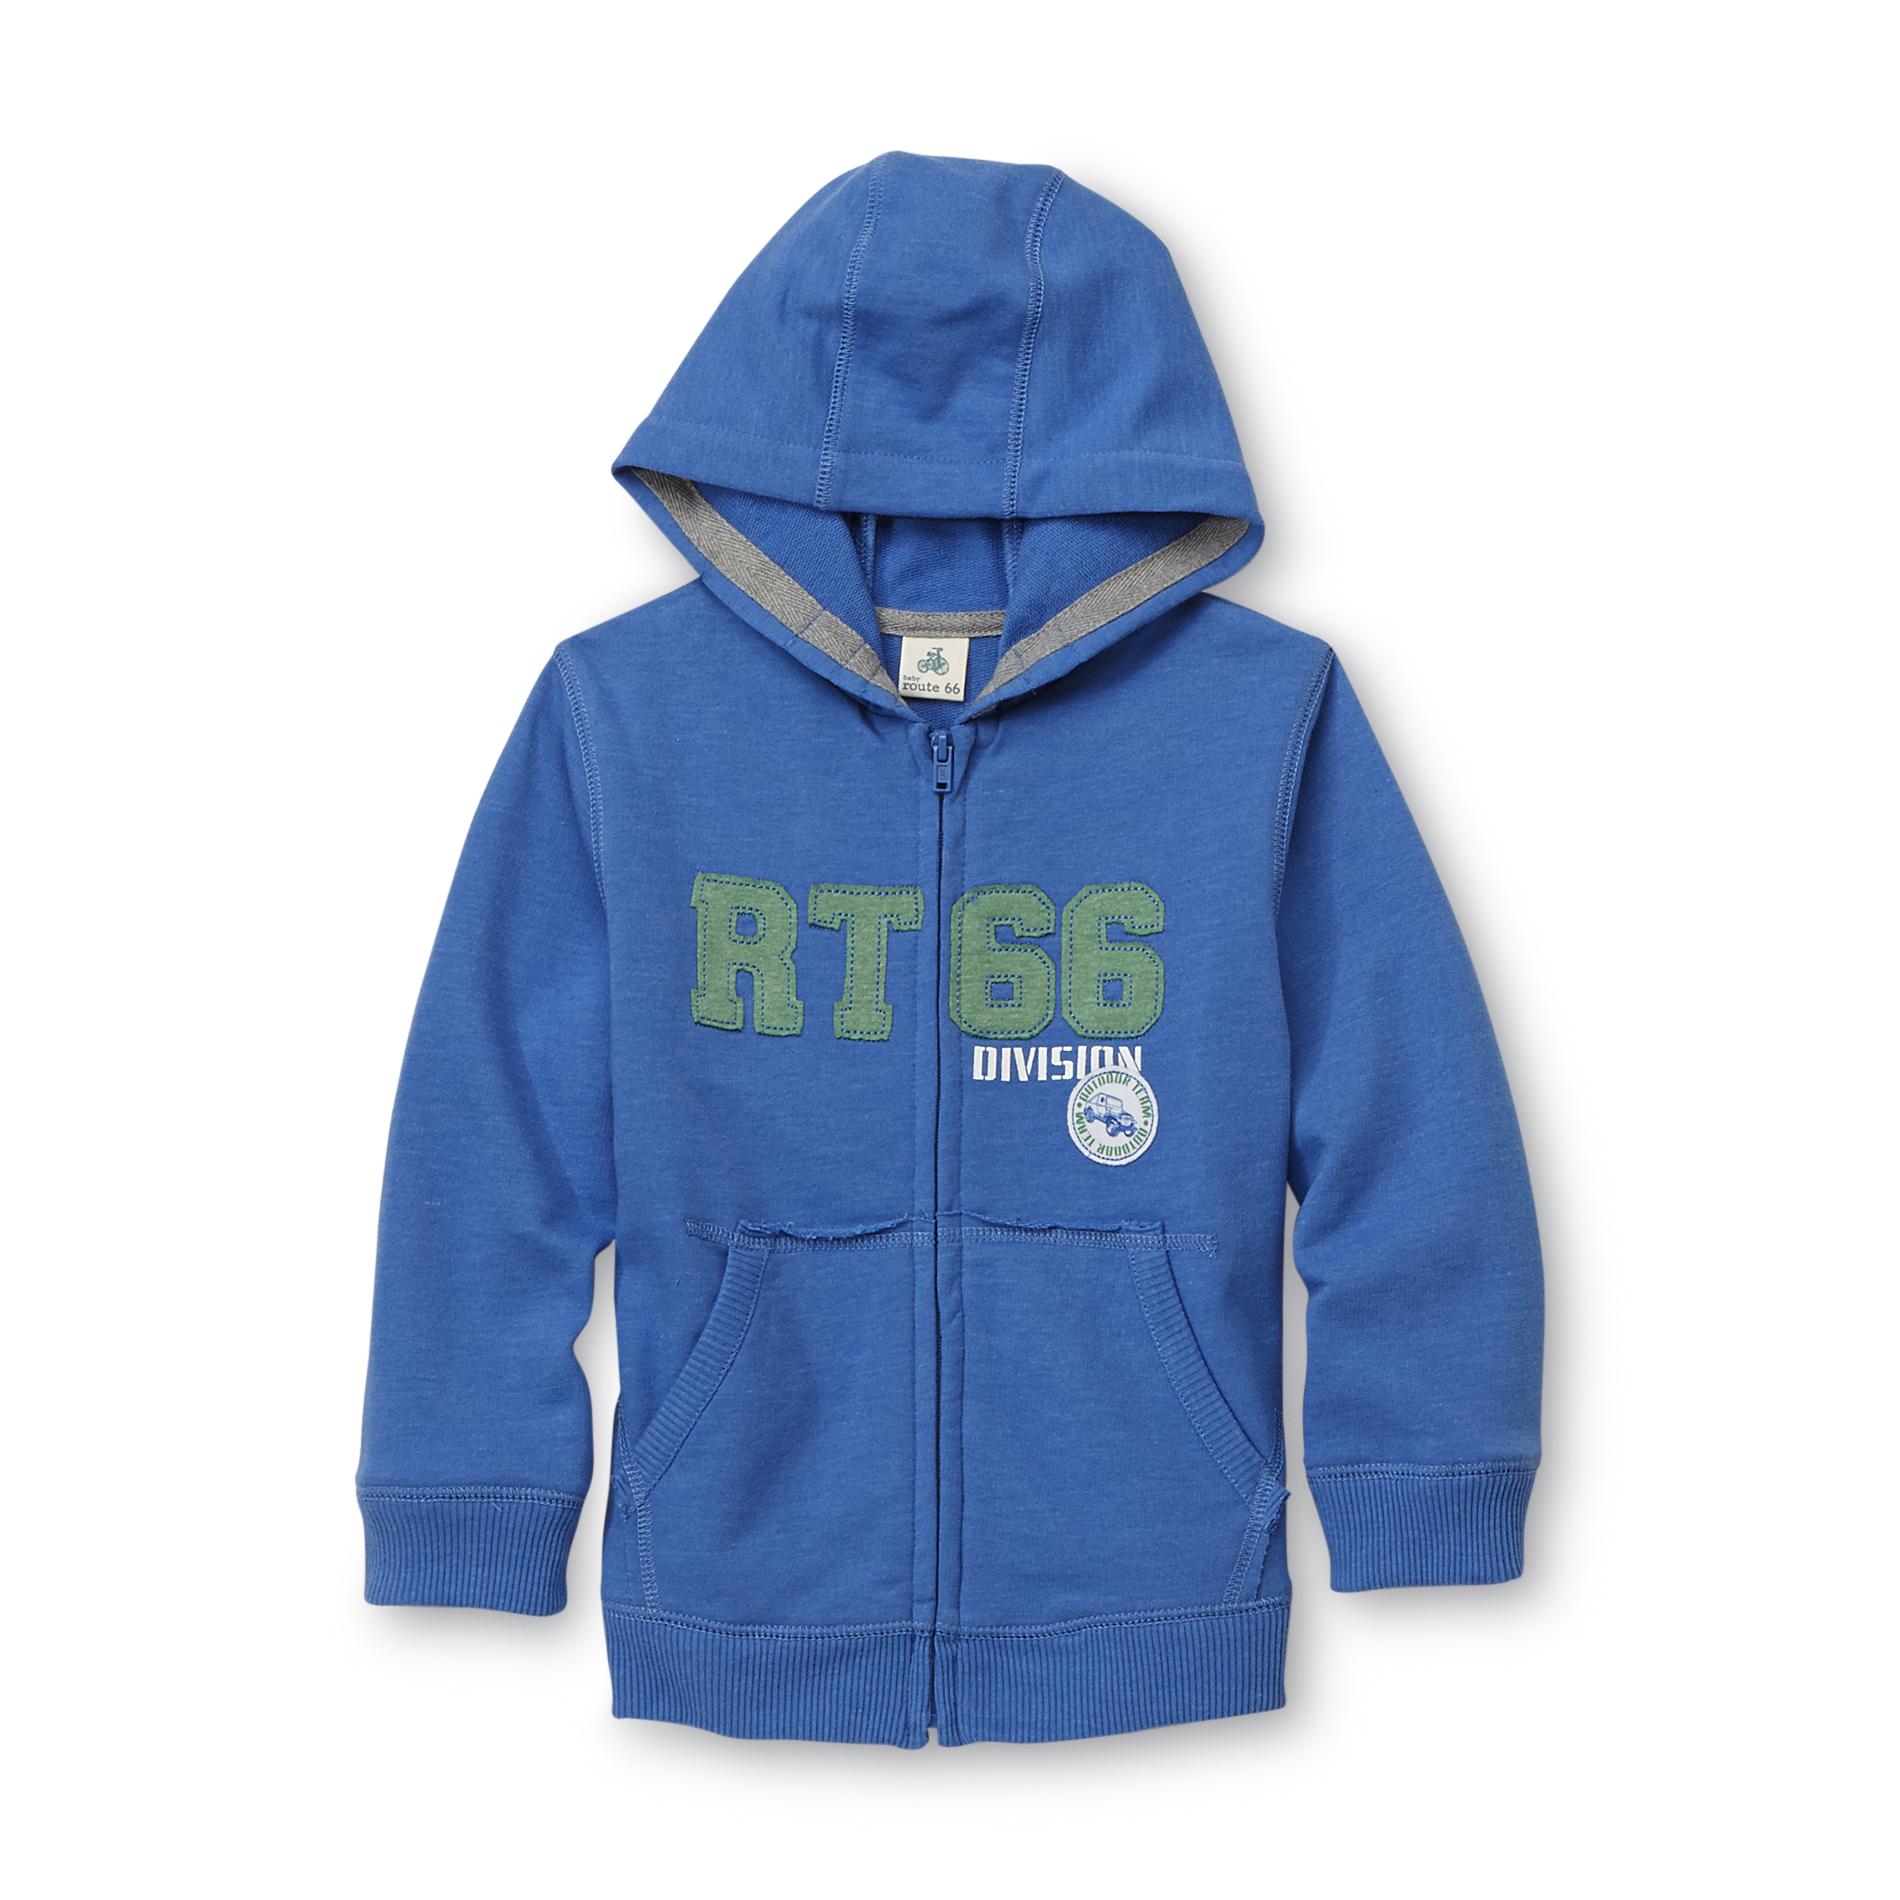 Route 66 Baby Toddler Boy's French Terry Hoodie Jacket - Outdoor Team